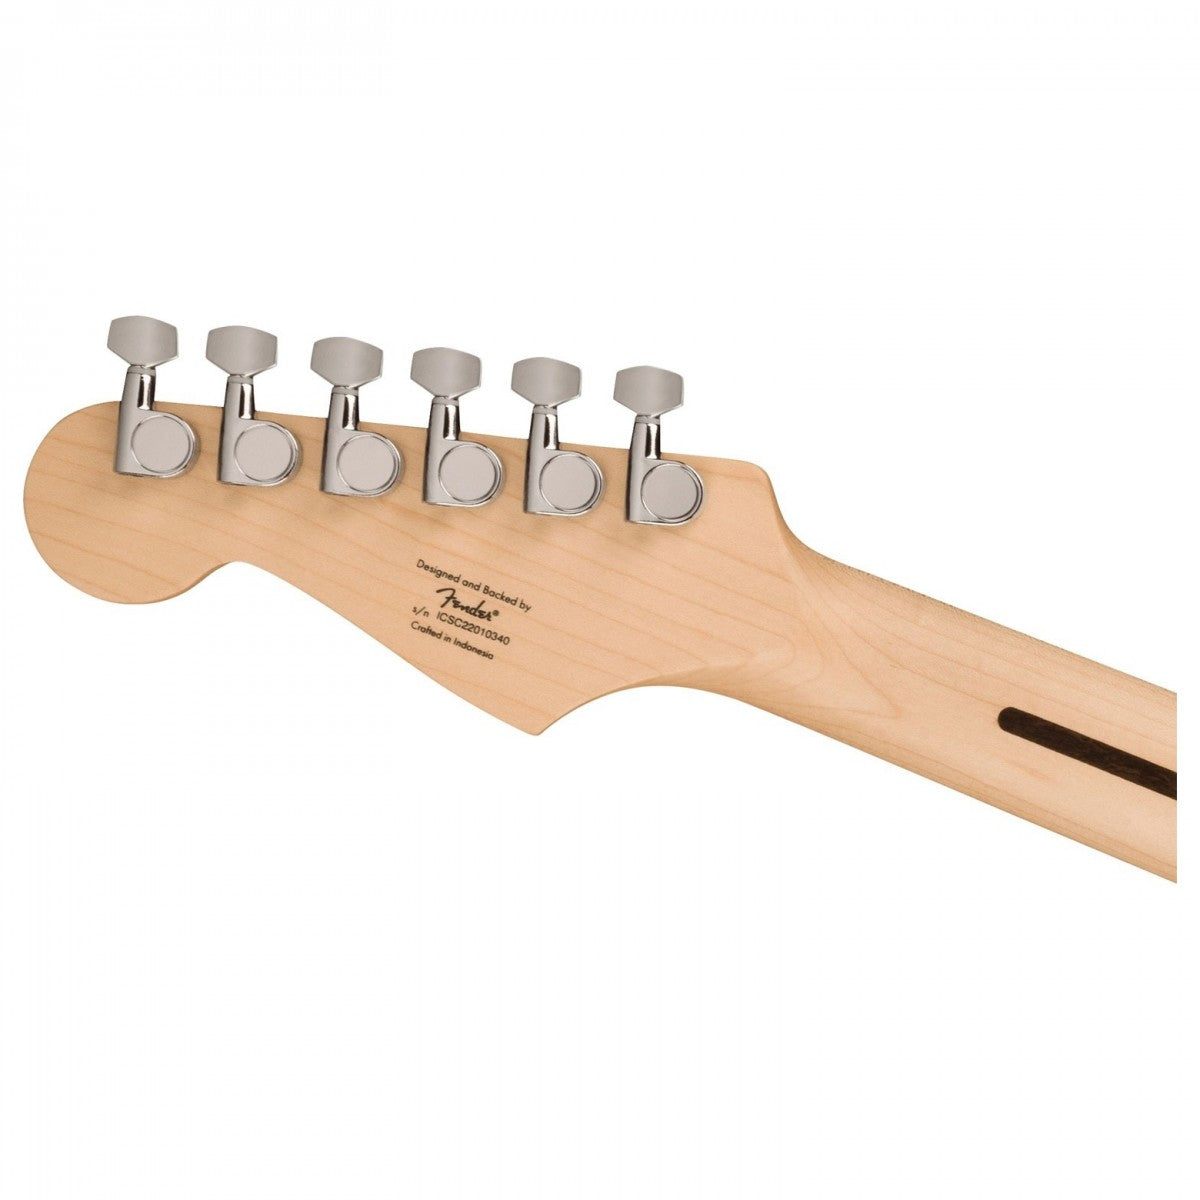 Squier Sonic Series Stratocaster Maple Fingerboard - Việt Music